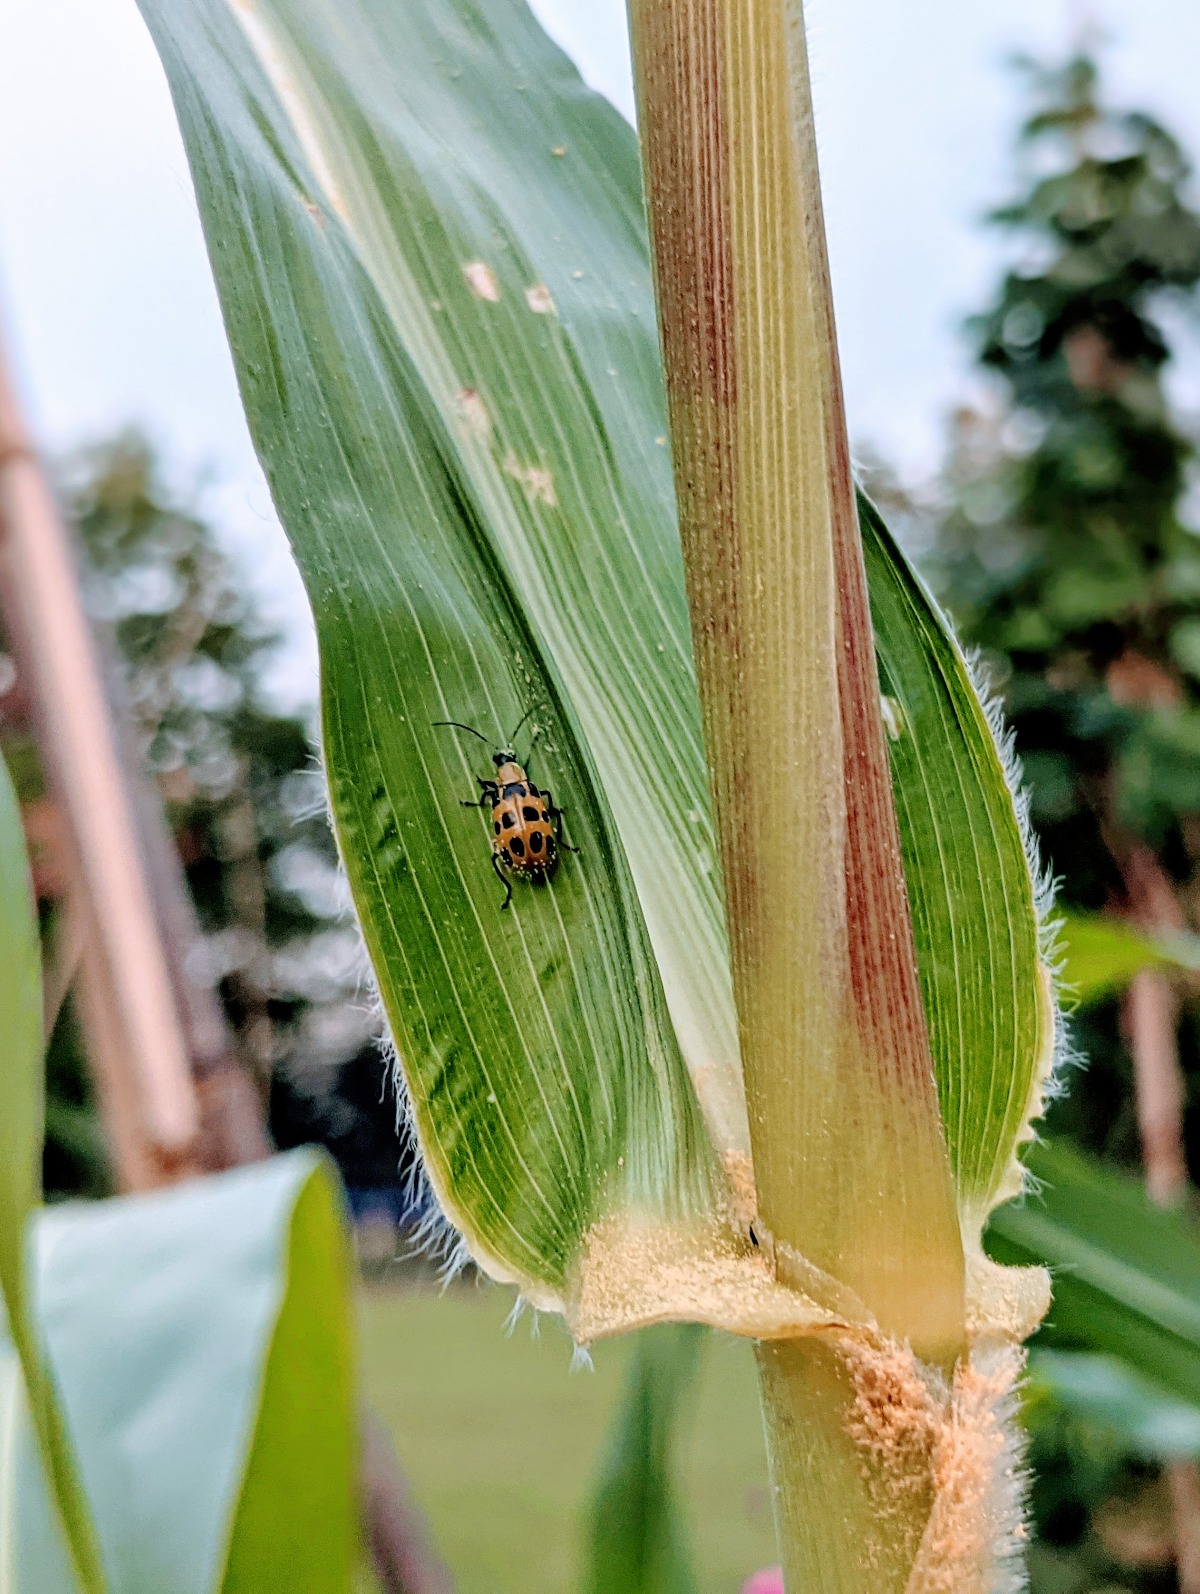 Cucumber Pests on Corn Plant in 2021 Garden